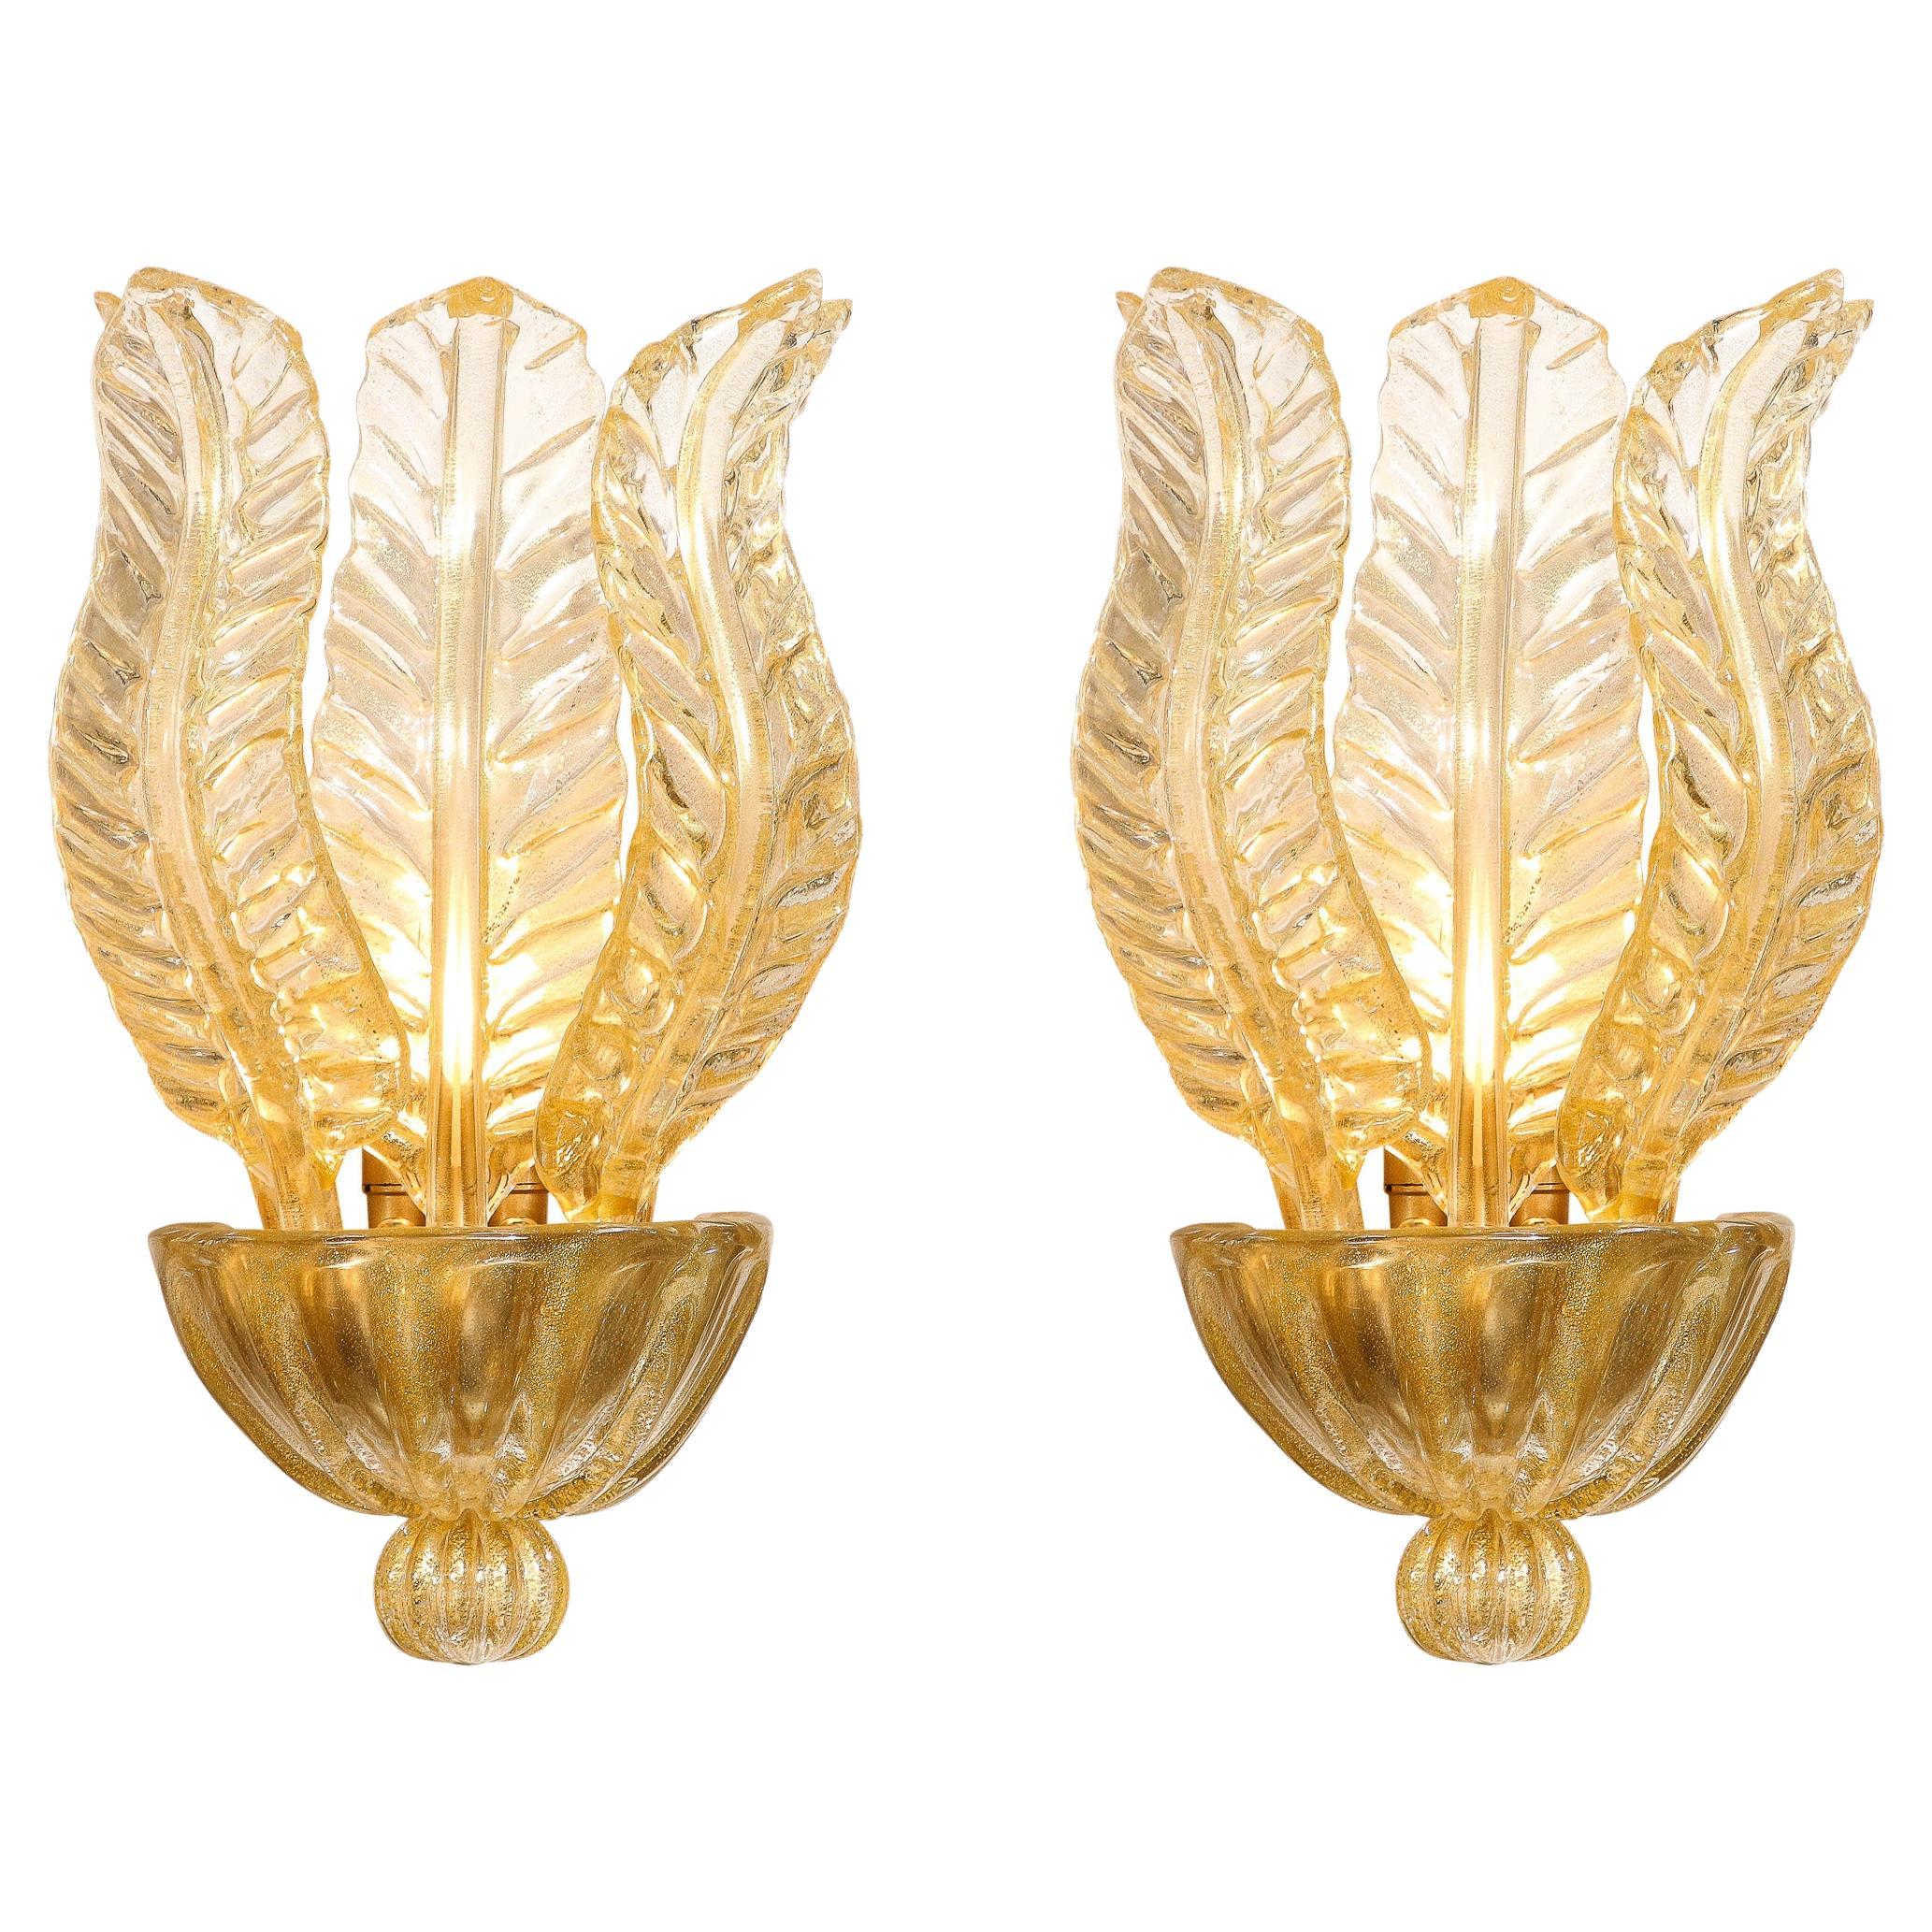 Pair of Hand-Blown Modernist Murano Foglia D'oro Glass Leaf Form Sconces For Sale